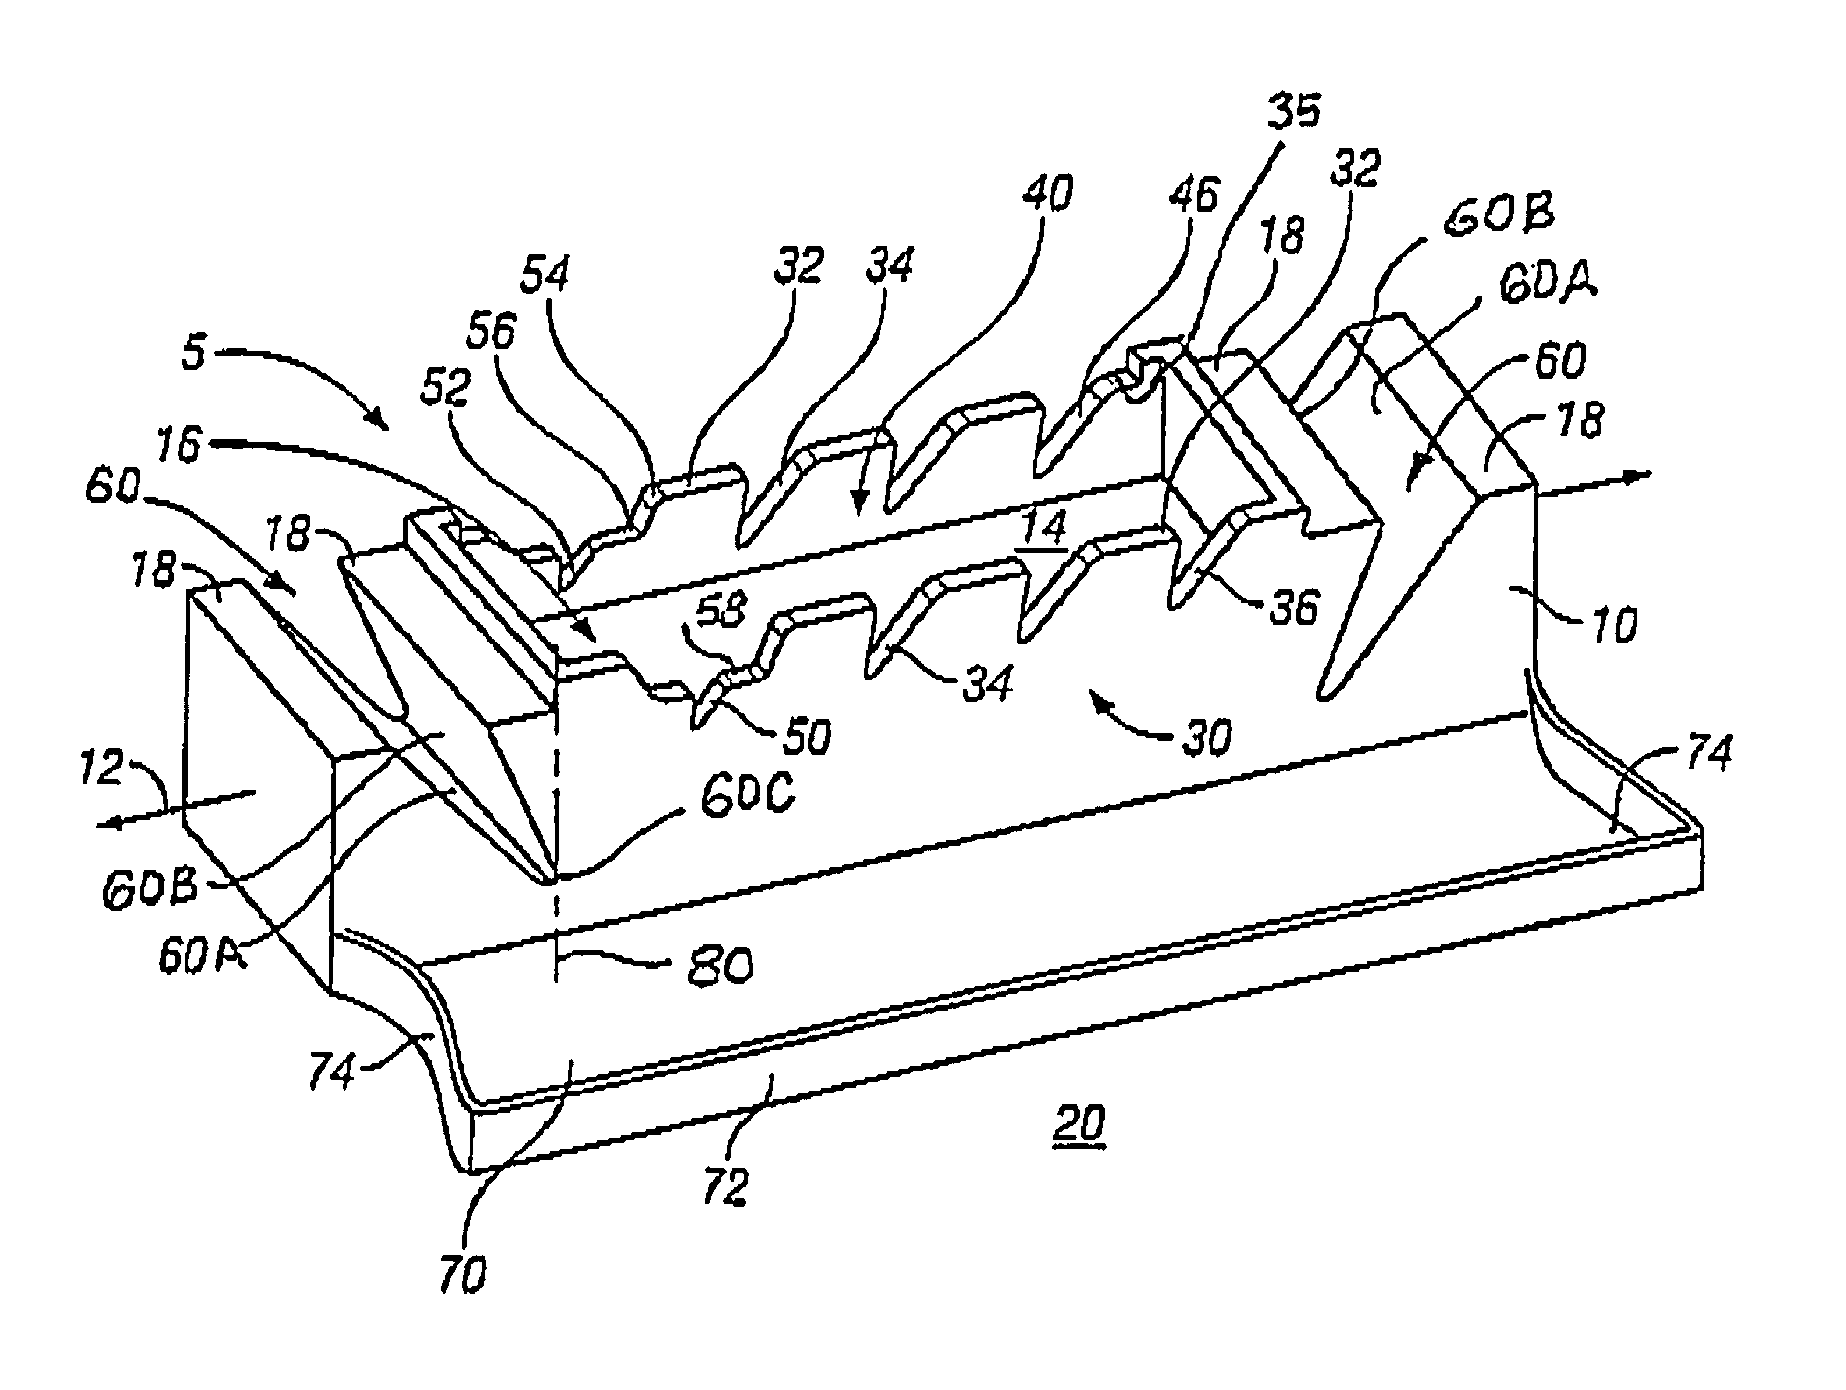 Cooking utensil support apparatus